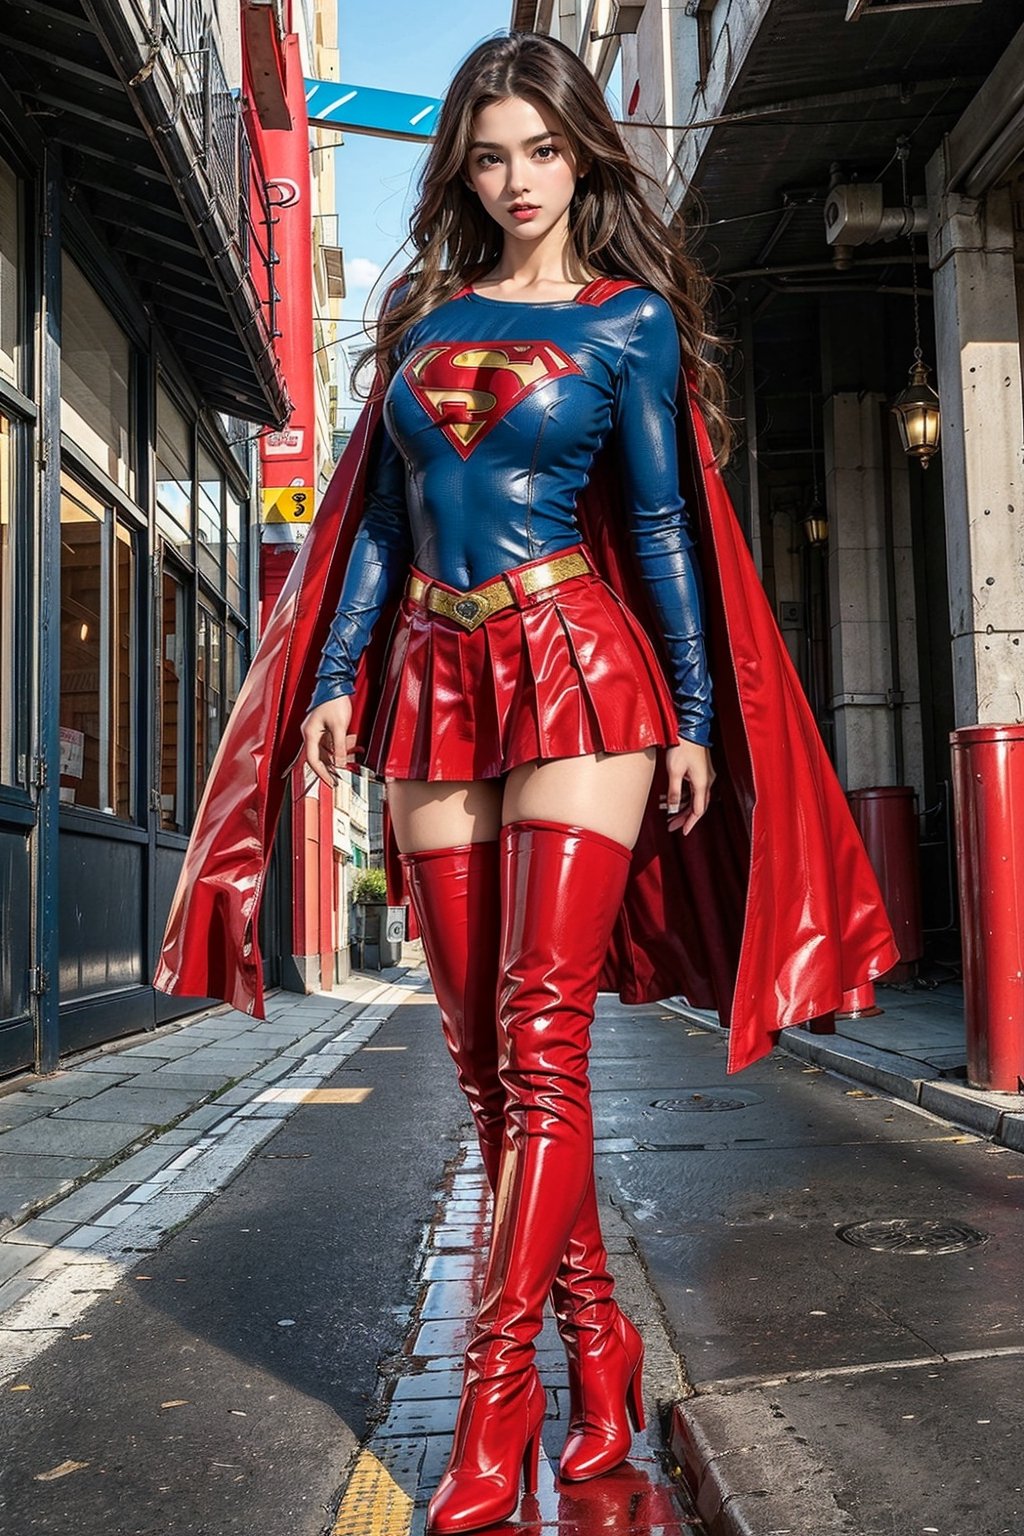 1girl, long black hair,supergirl,wearing Supergirl's blue tight uniform,perfect,red Boots higher than knees,Red miniskirt,Red long cape,full body,Bright colors,Bright red Boots, red miniskirt,Huge chest,Boots over the knee,Clothes are tied to skirts,Red miniskirt,Female model posen,Red over-the-knee pointed high-heeled boots,full body,running in the middle of the road,full body,tall girl,long boots,Red long cape,Boots longer than legs,Chinese supergirl,18years old,Don't show belly,Extremely long tip boots,red skirt,full body,supergirl's tight suit,Don't show knees,Knees wrapped in boots,strong girl,Pointy high-heeled boots,thin high heels,Uniforms and skirts are connectedUniforms and skirts are connected,Don't show your stomach,red skirt,full body,Extra long red boots,Golden Supergirl Belt,One-piece tight uniform
,Show the outline of the muscles,Red miniskirt and long cape,Boots must be over the knee,Integrated coats,Golden Supergirl Belt,Red miniskirt,Full of muscles,Tall and strong,Sexy,Full of muscle beauty,red dress,The skirt must be red.